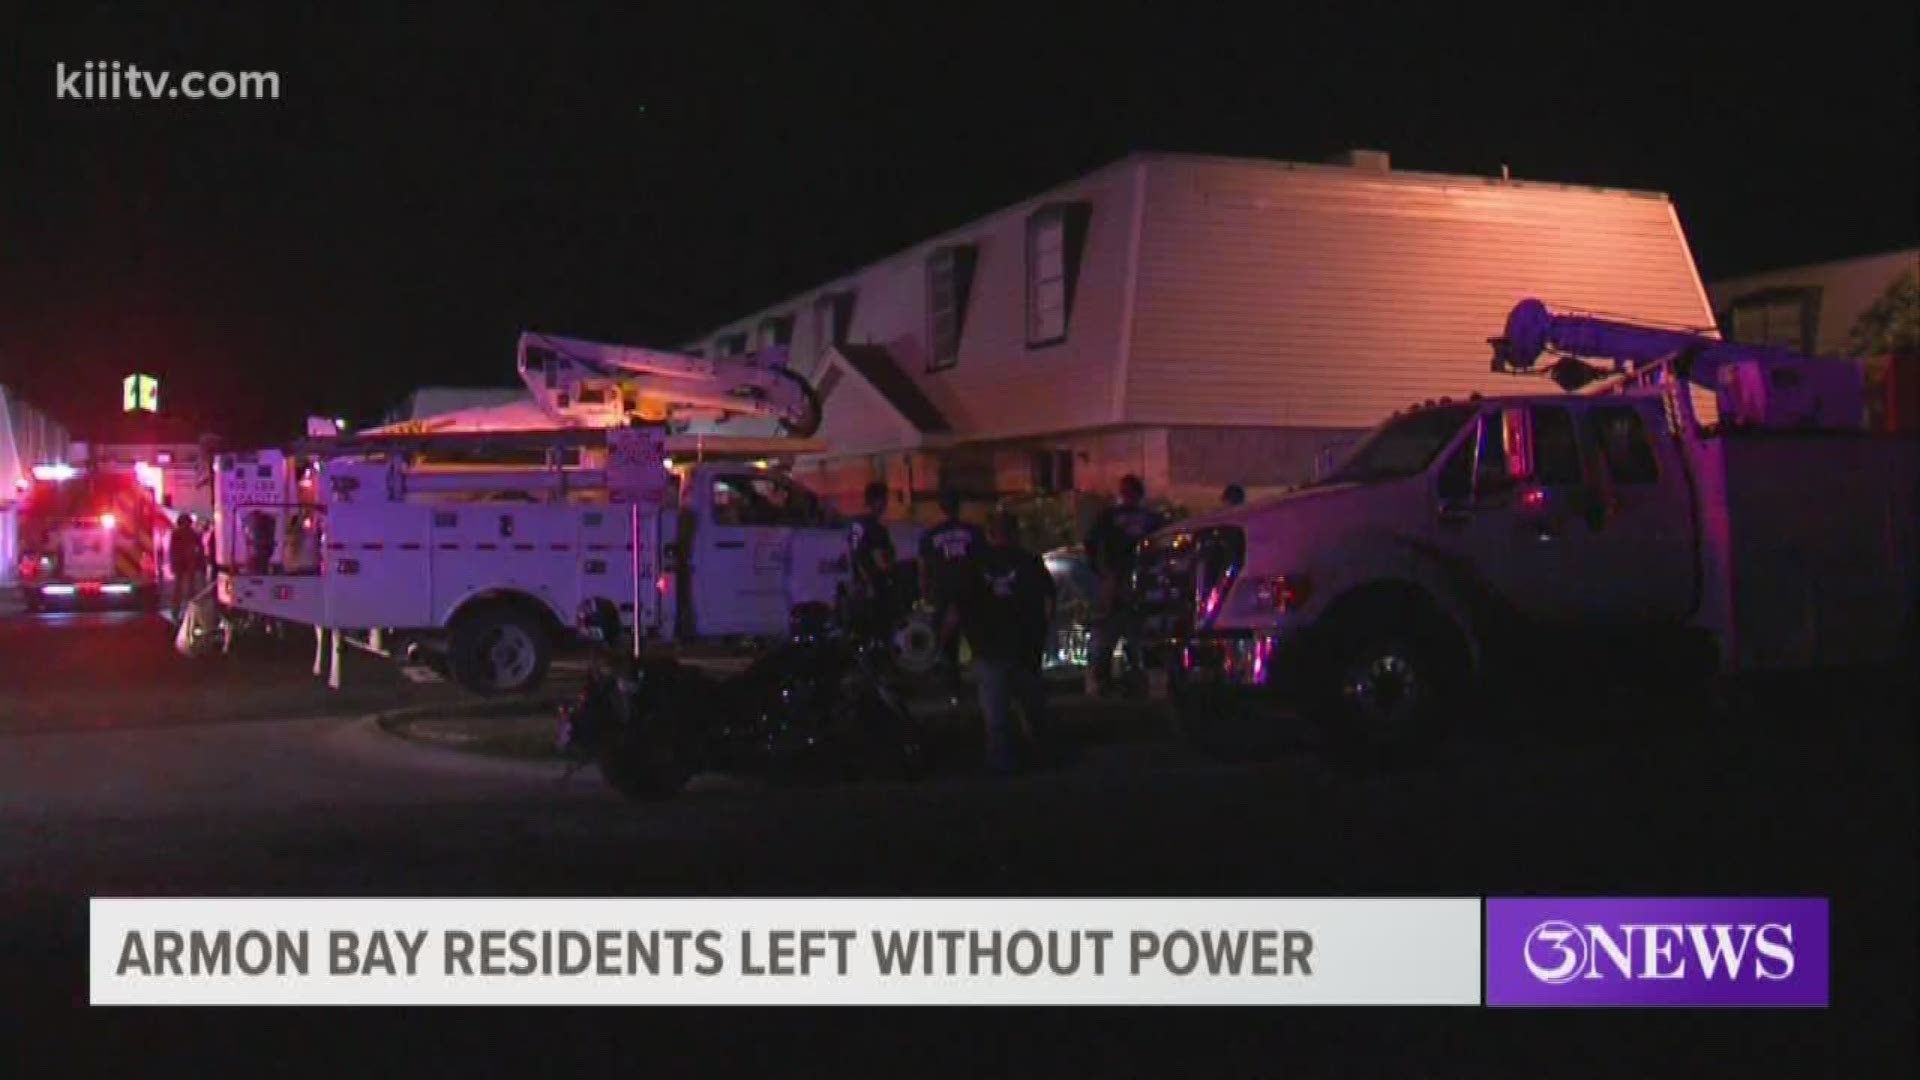 Officials said it caused half of the apartment complex's power to go out